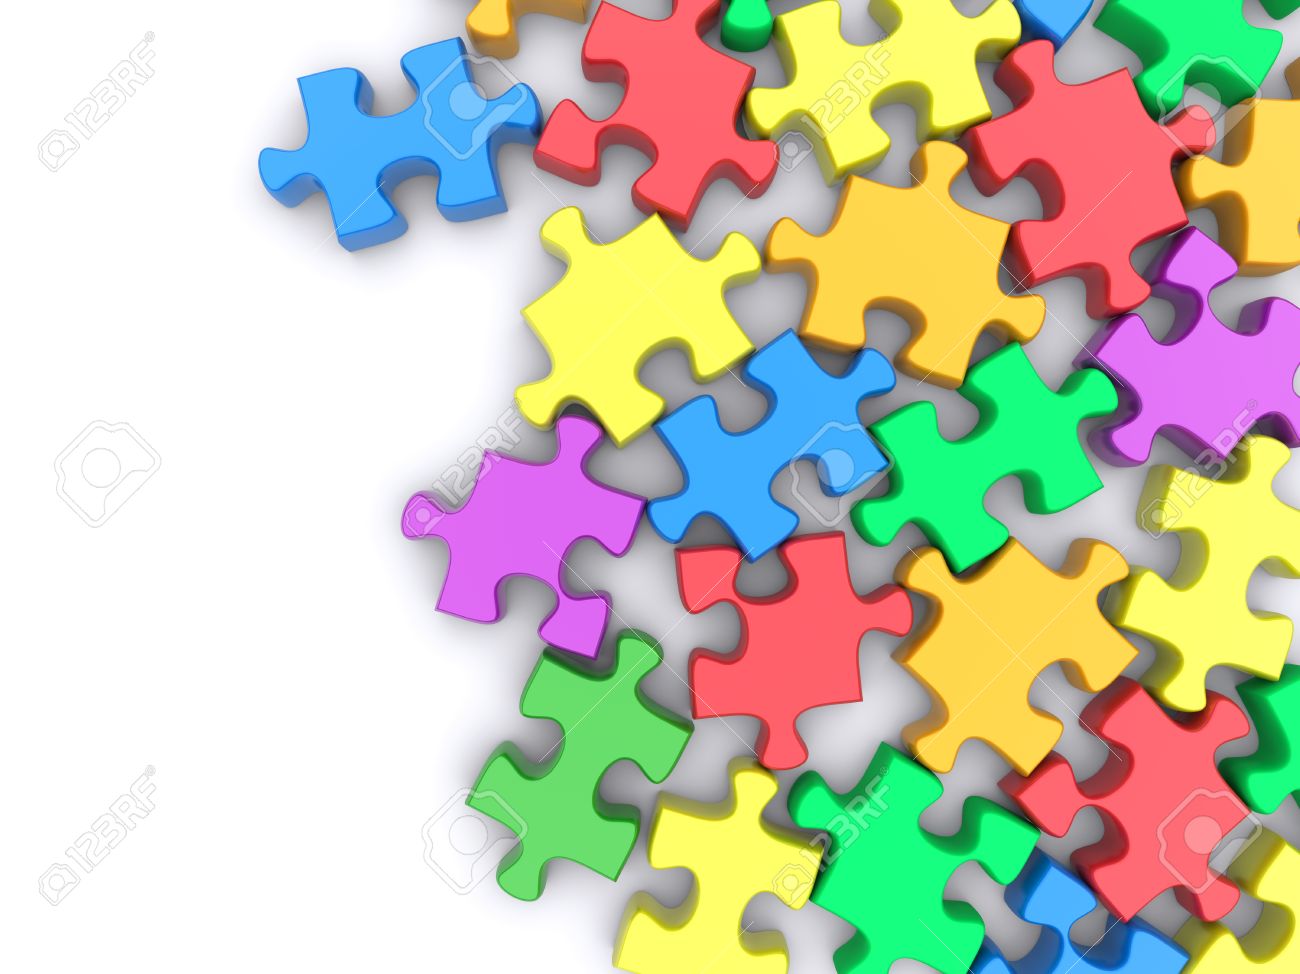 Jigsaw Puzzle On A White Background 3d Rendered Image Stock Photo